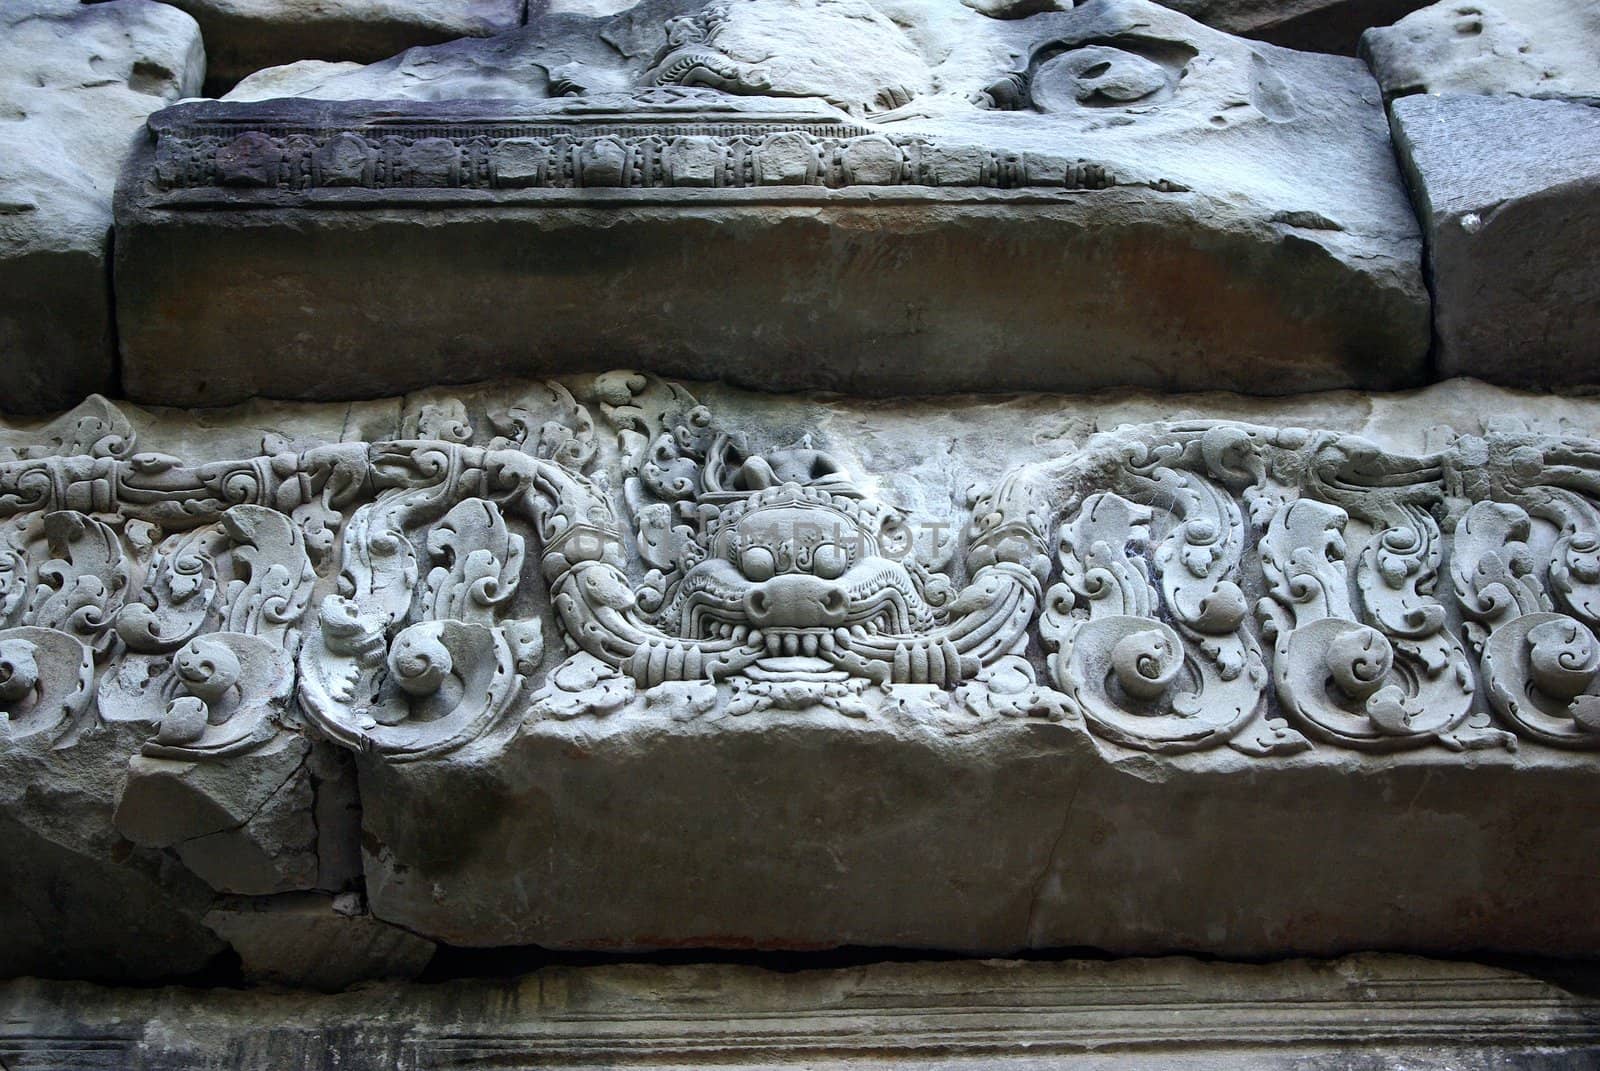 It's a close-up of an engraved grey stone of a temple in Angkor